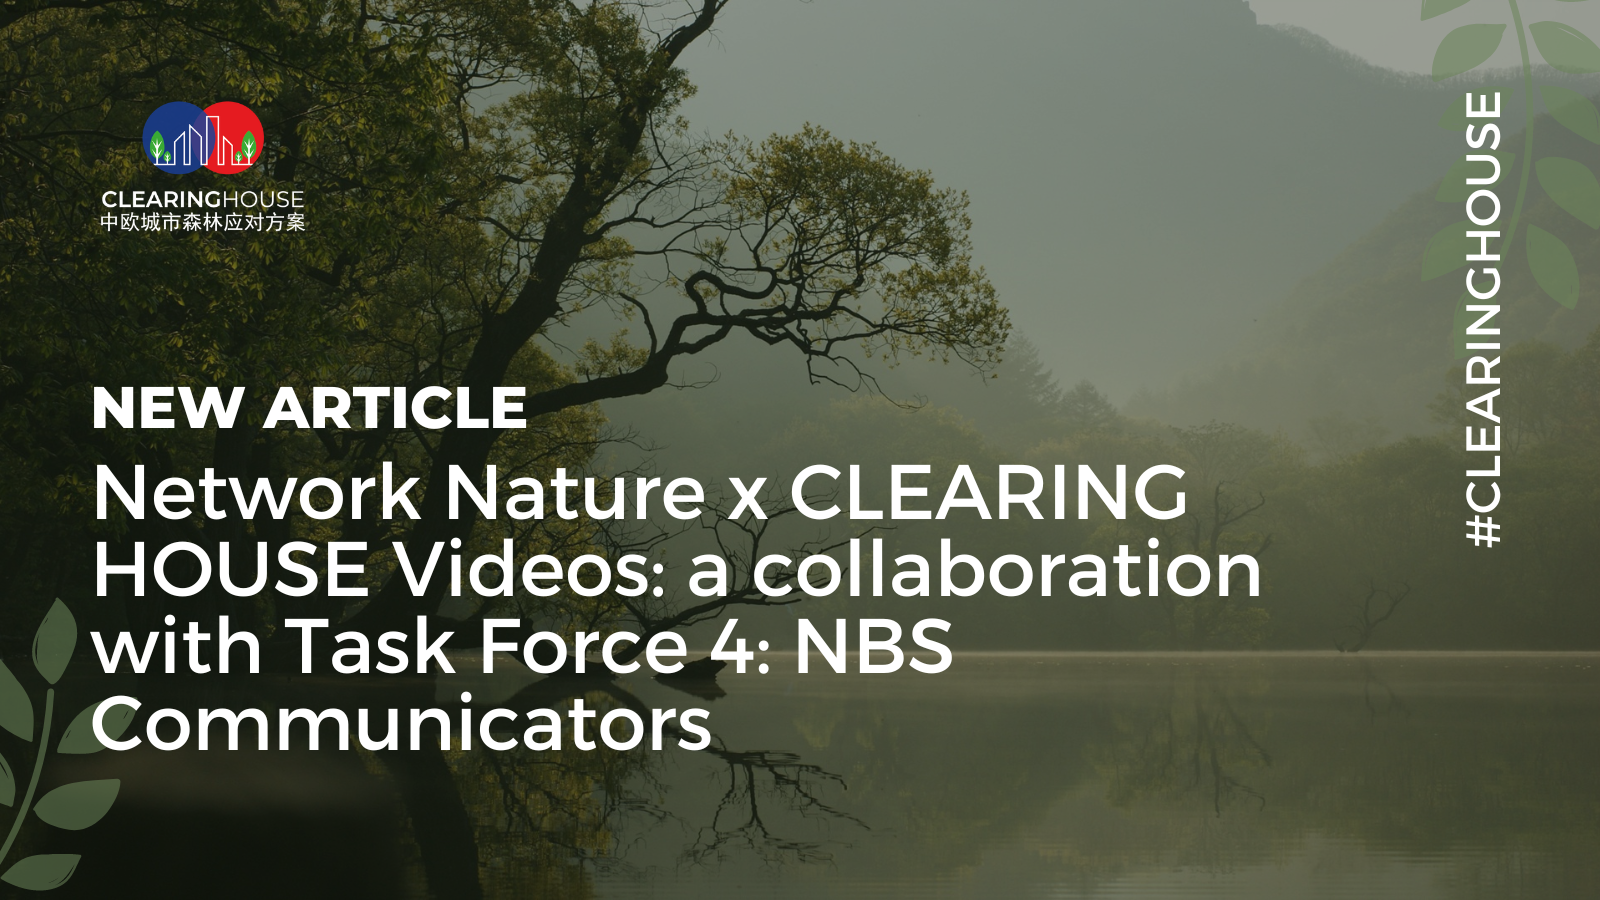 Forest Force Xxx Video - Network Nature x CLEARING HOUSE Videos: a collaboration with Task Force 4:  NBS Communicators â€“ Clearing House H2020